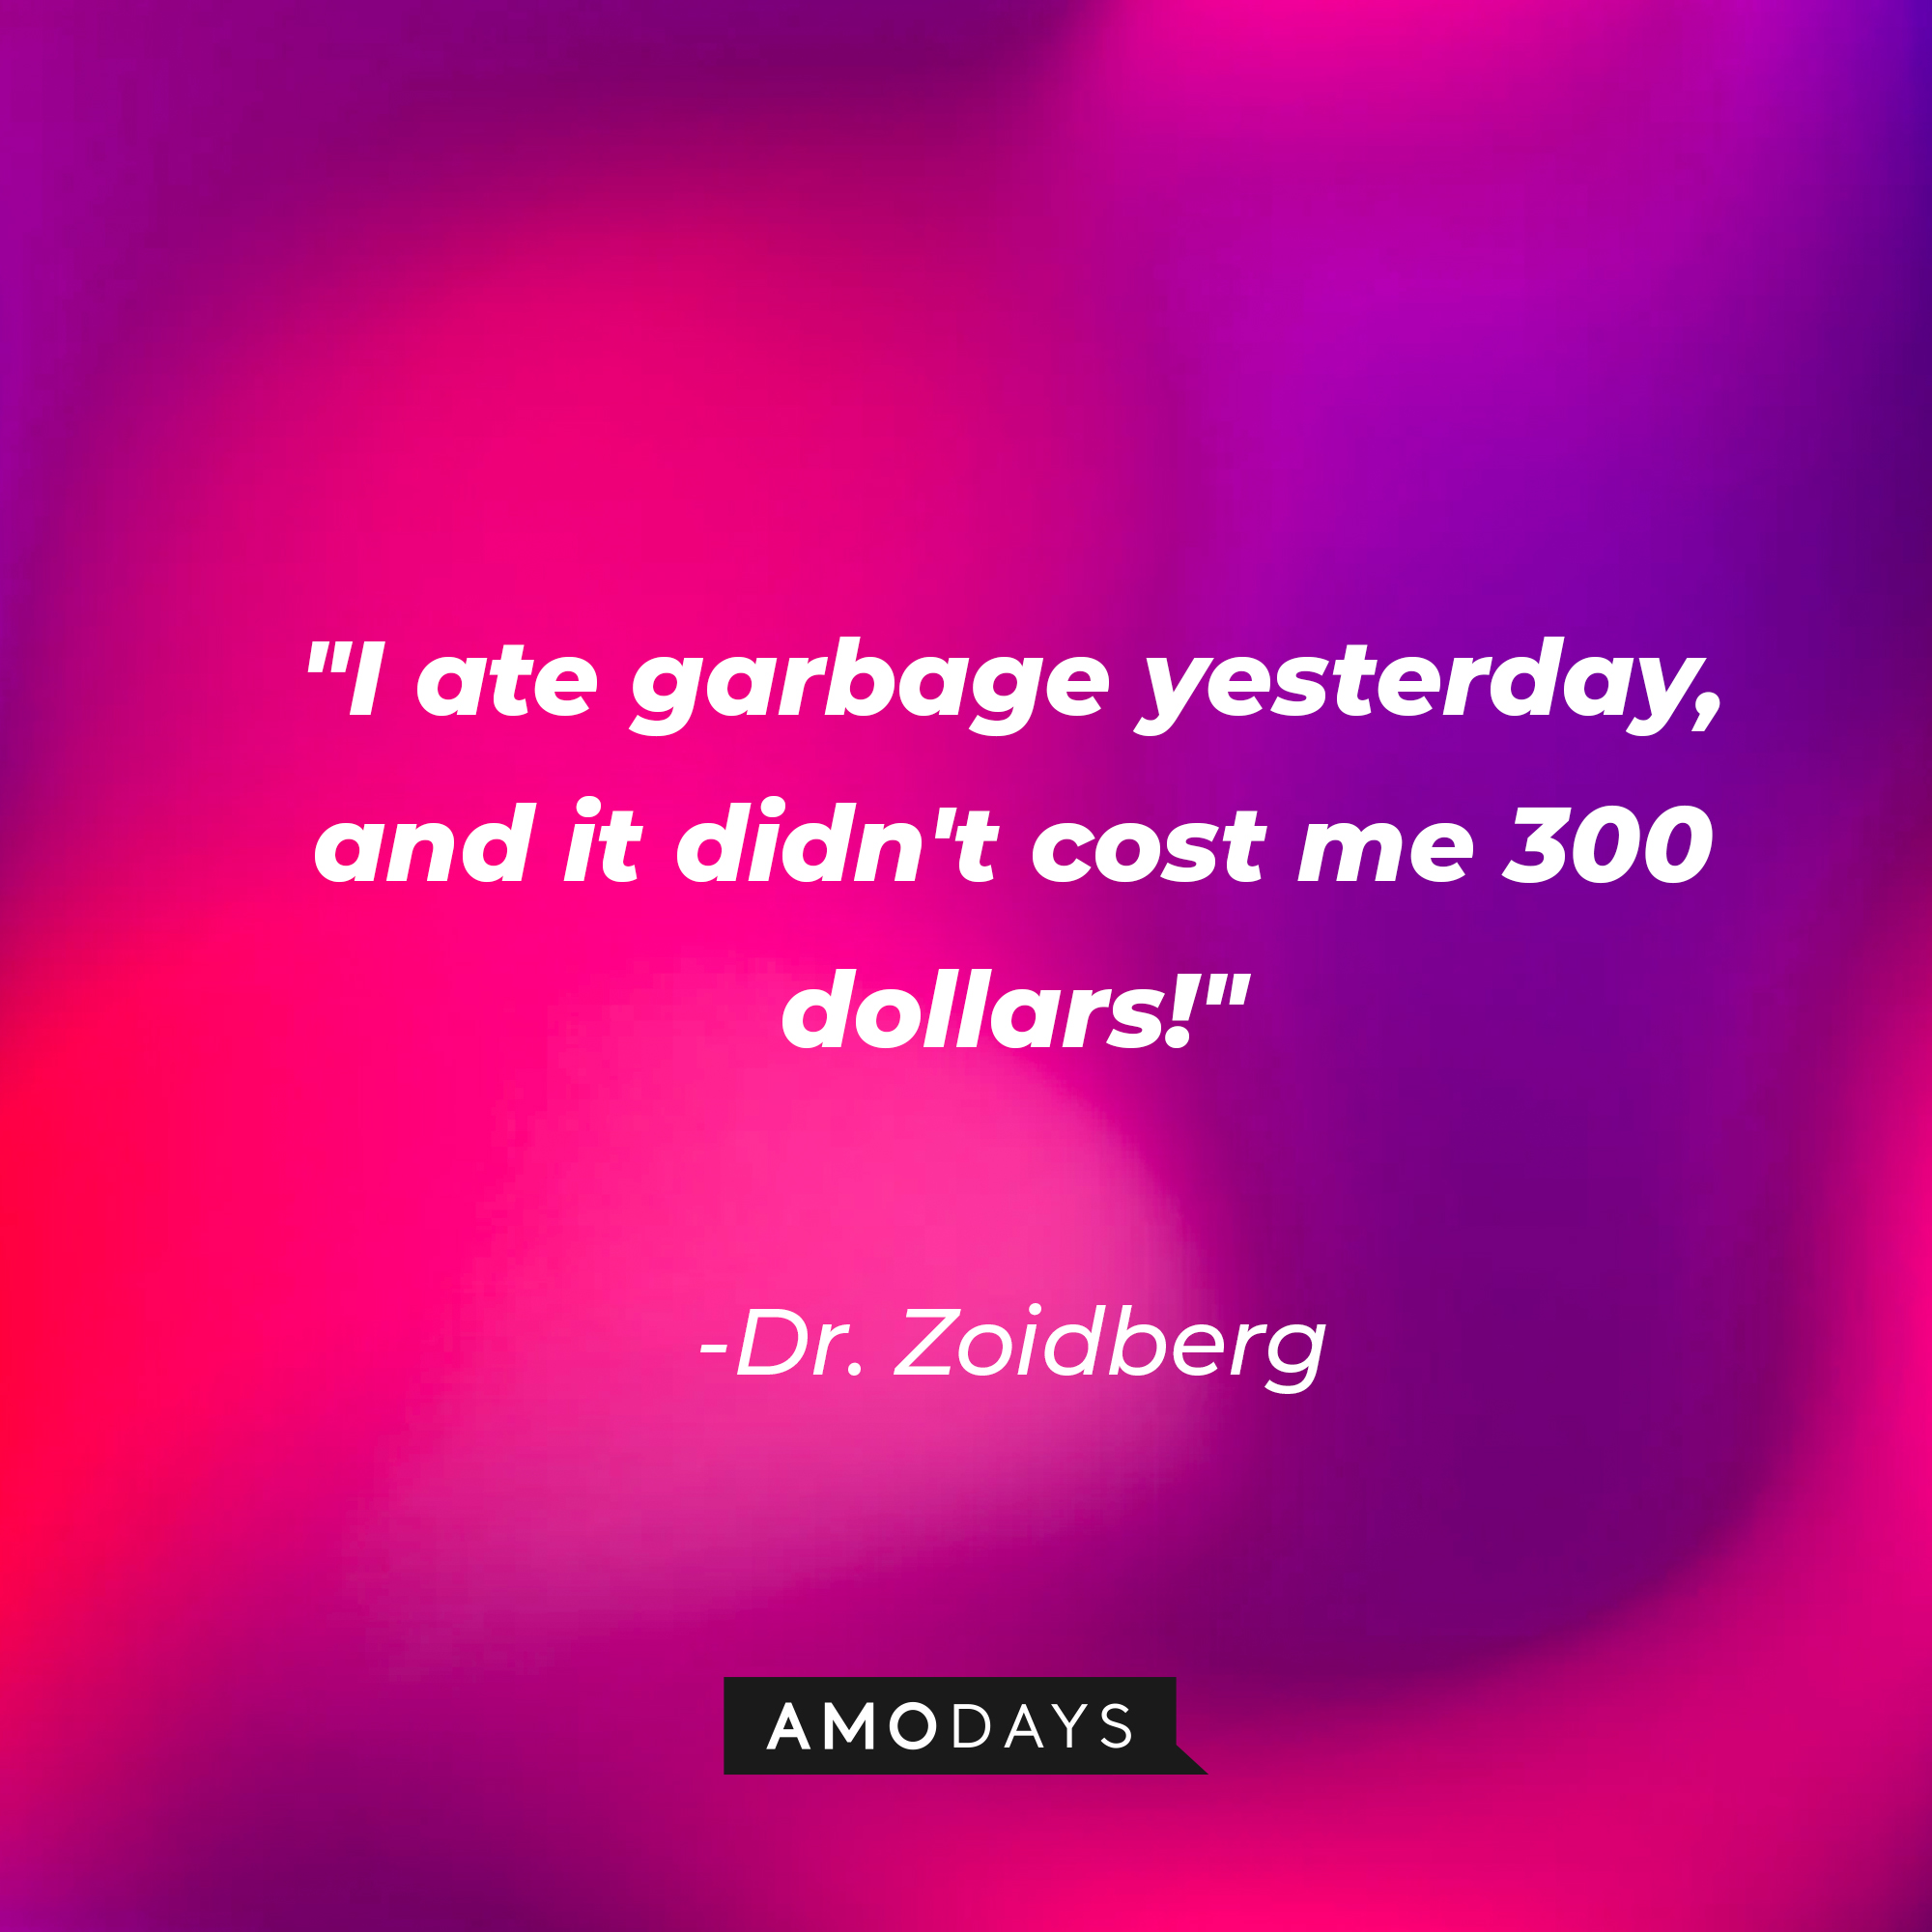 Dr. Zoidberg's quote: "I ate garbage yesterday, and it didn't cost me 300 dollars!" | Source: AmoDays